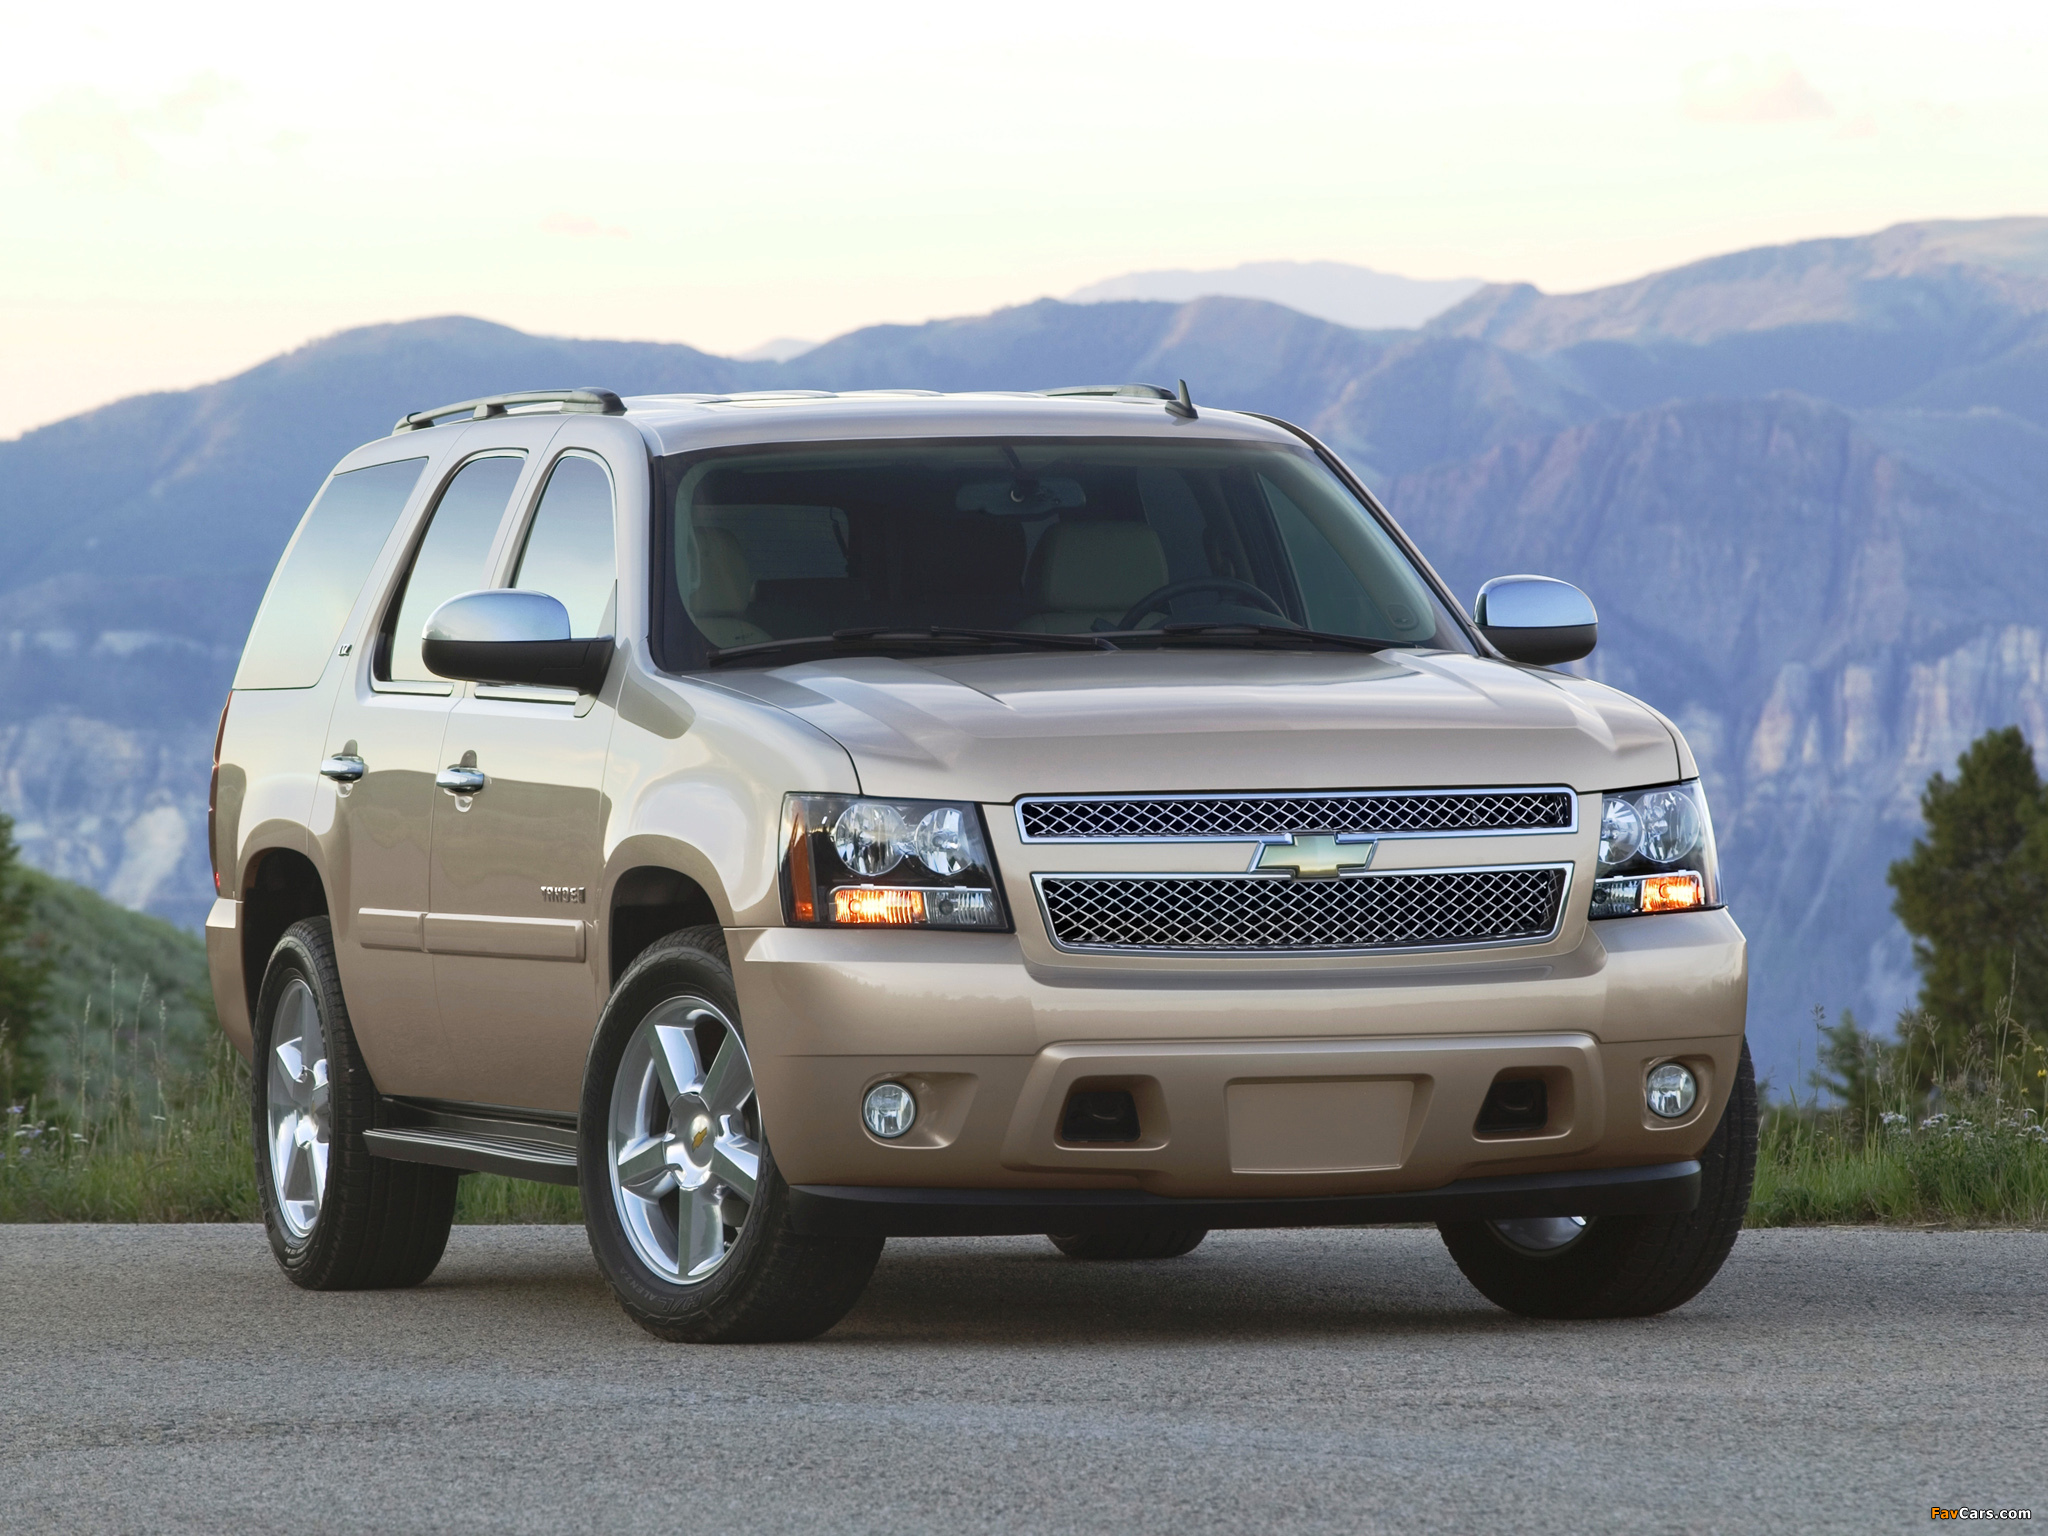 Chevrolet Tahoe (GMT900) 2006 pictures (2048 x 1536)